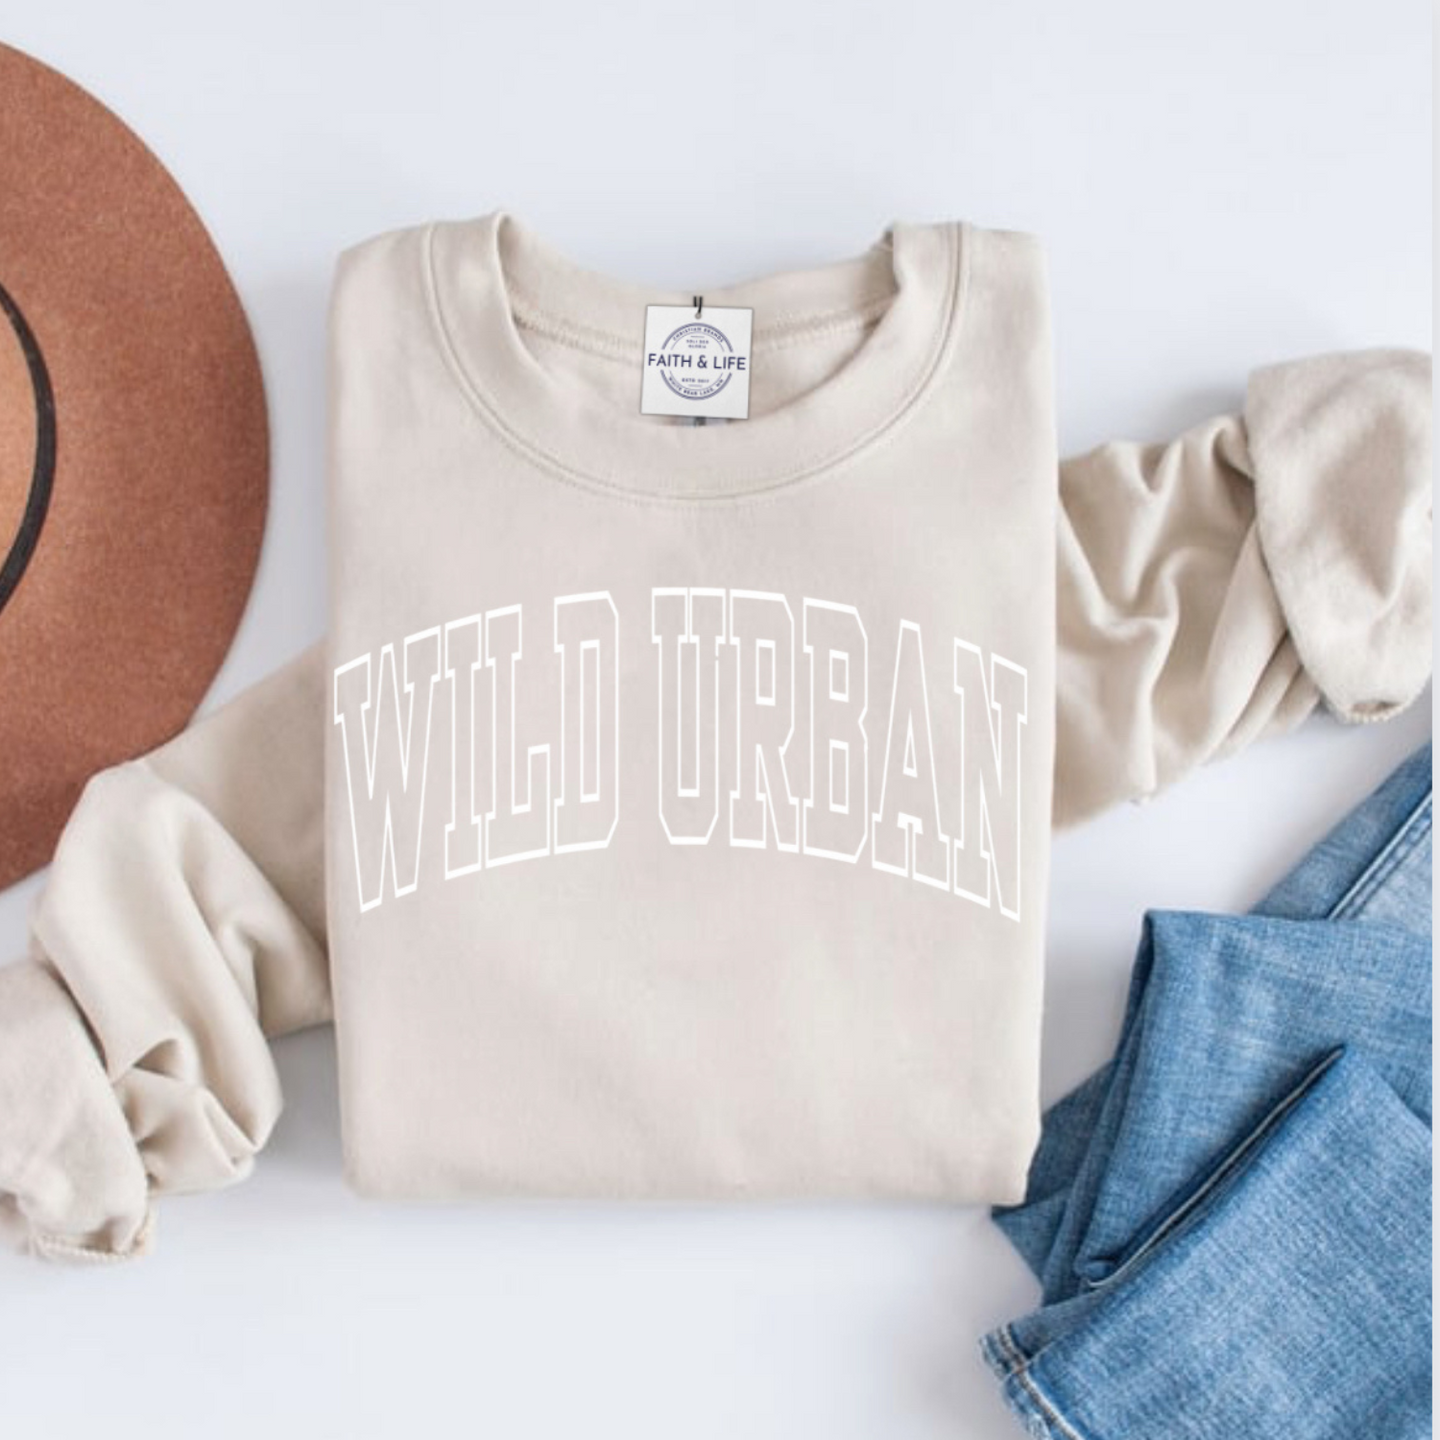 Custom Order For Wild Urban SAND Sweatshirt With Bubble College Letter